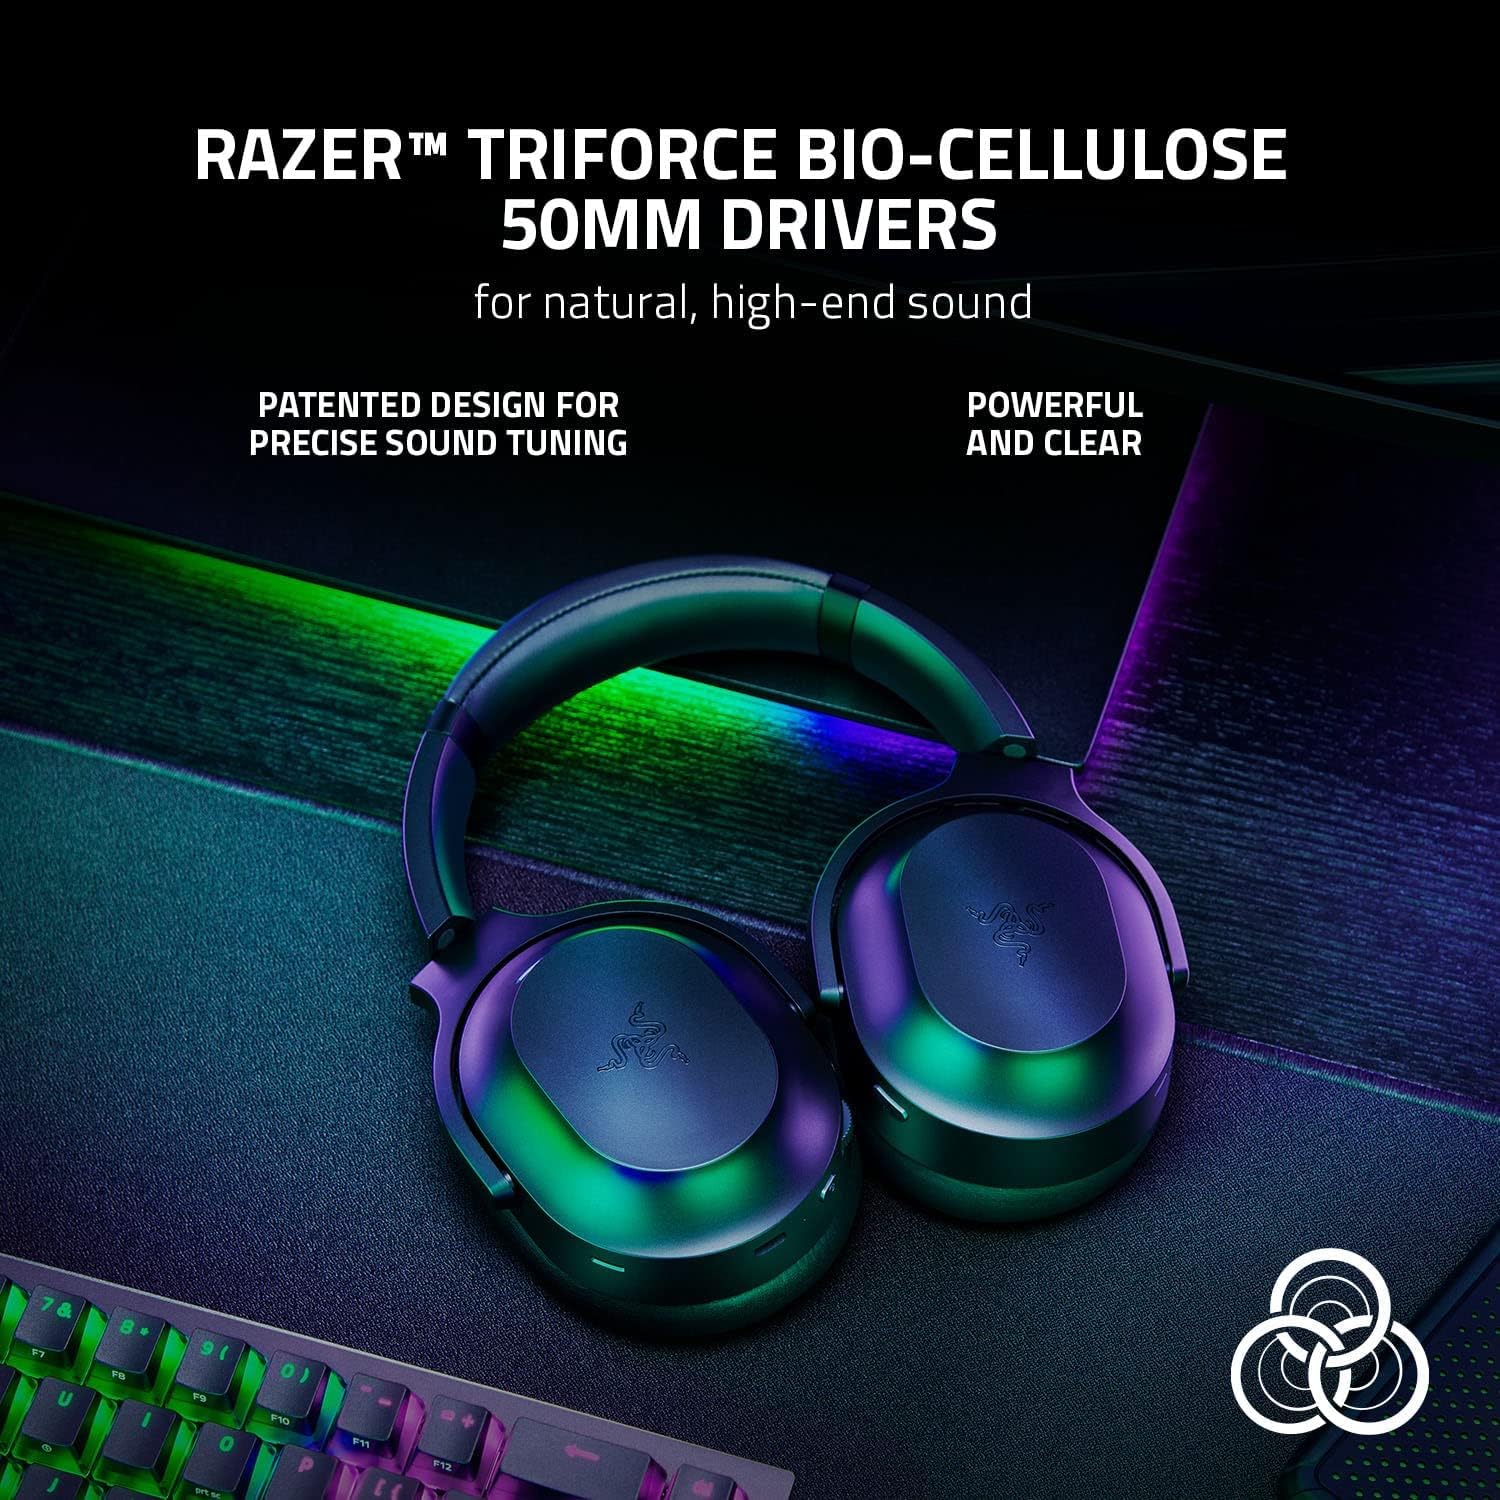 Unleash Your Gaming Potential with the Razer Barracuda Pro Wireless Gaming & Mobile Headset